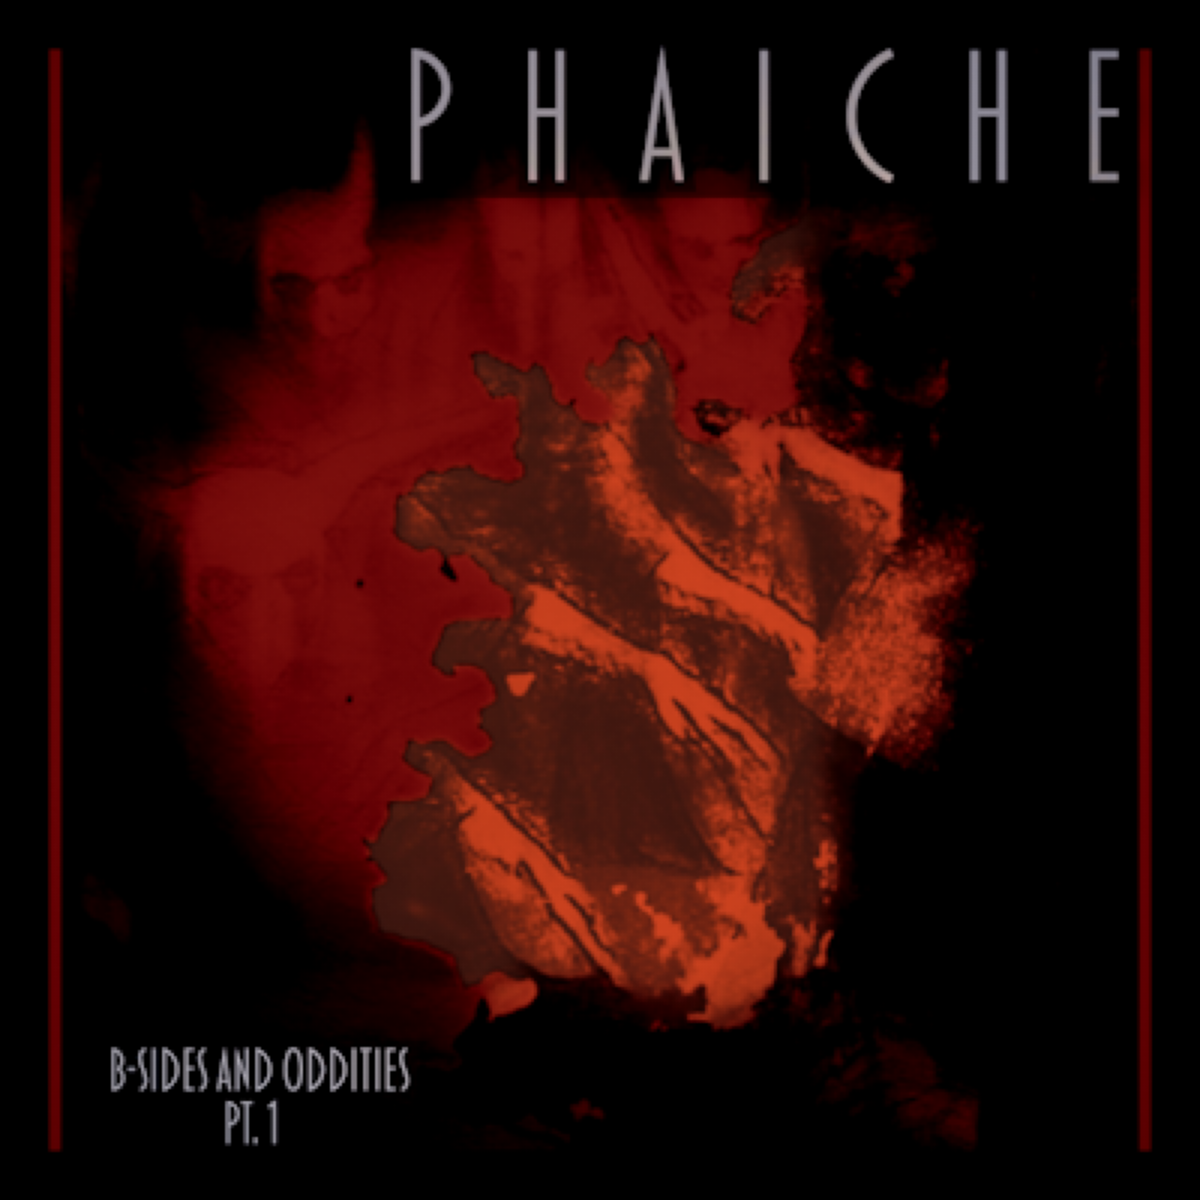 Get the Phaiche Groove Now!